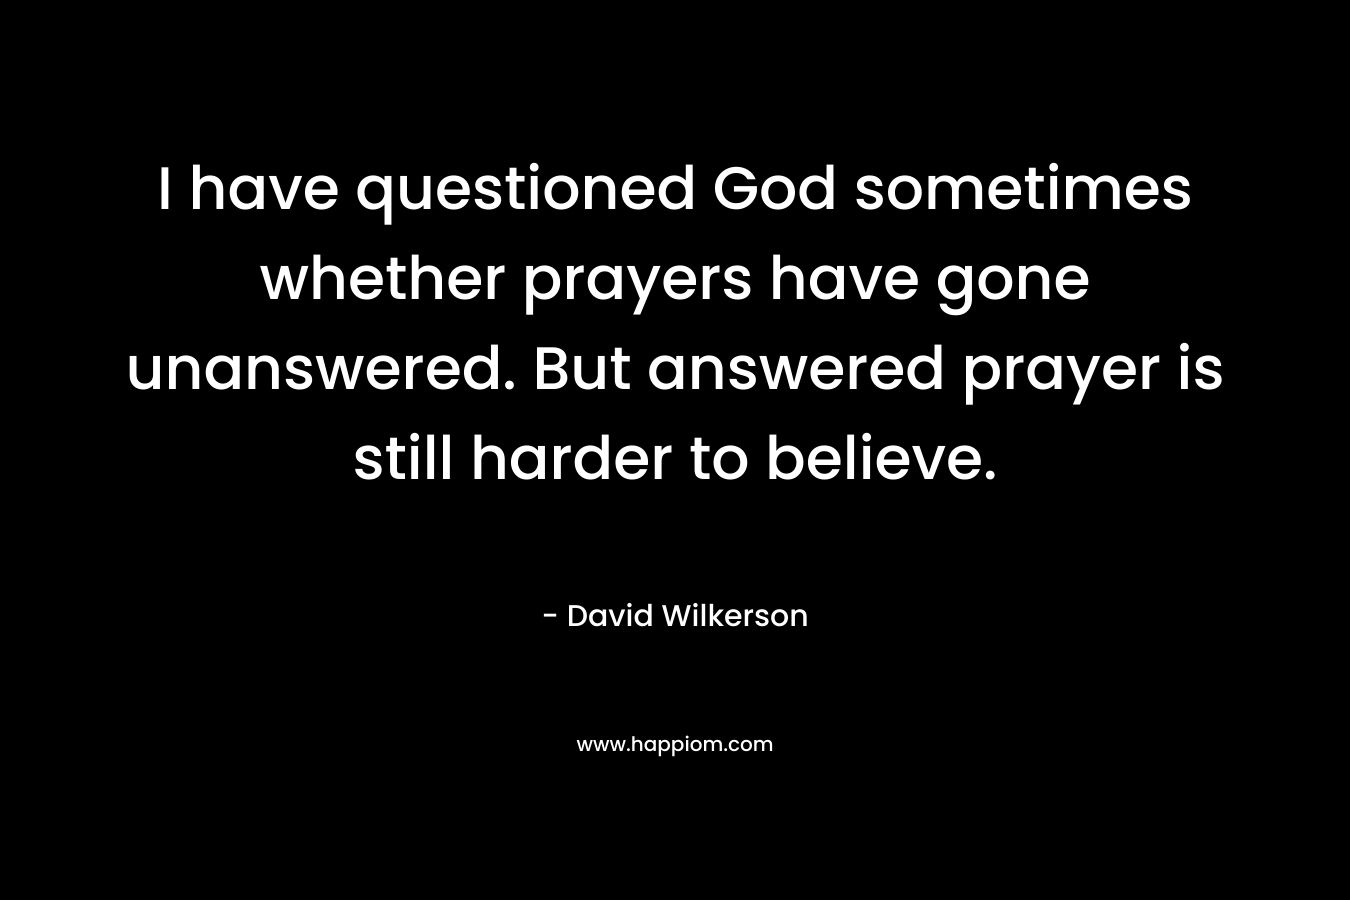 I have questioned God sometimes whether prayers have gone unanswered. But answered prayer is still harder to believe. – David Wilkerson